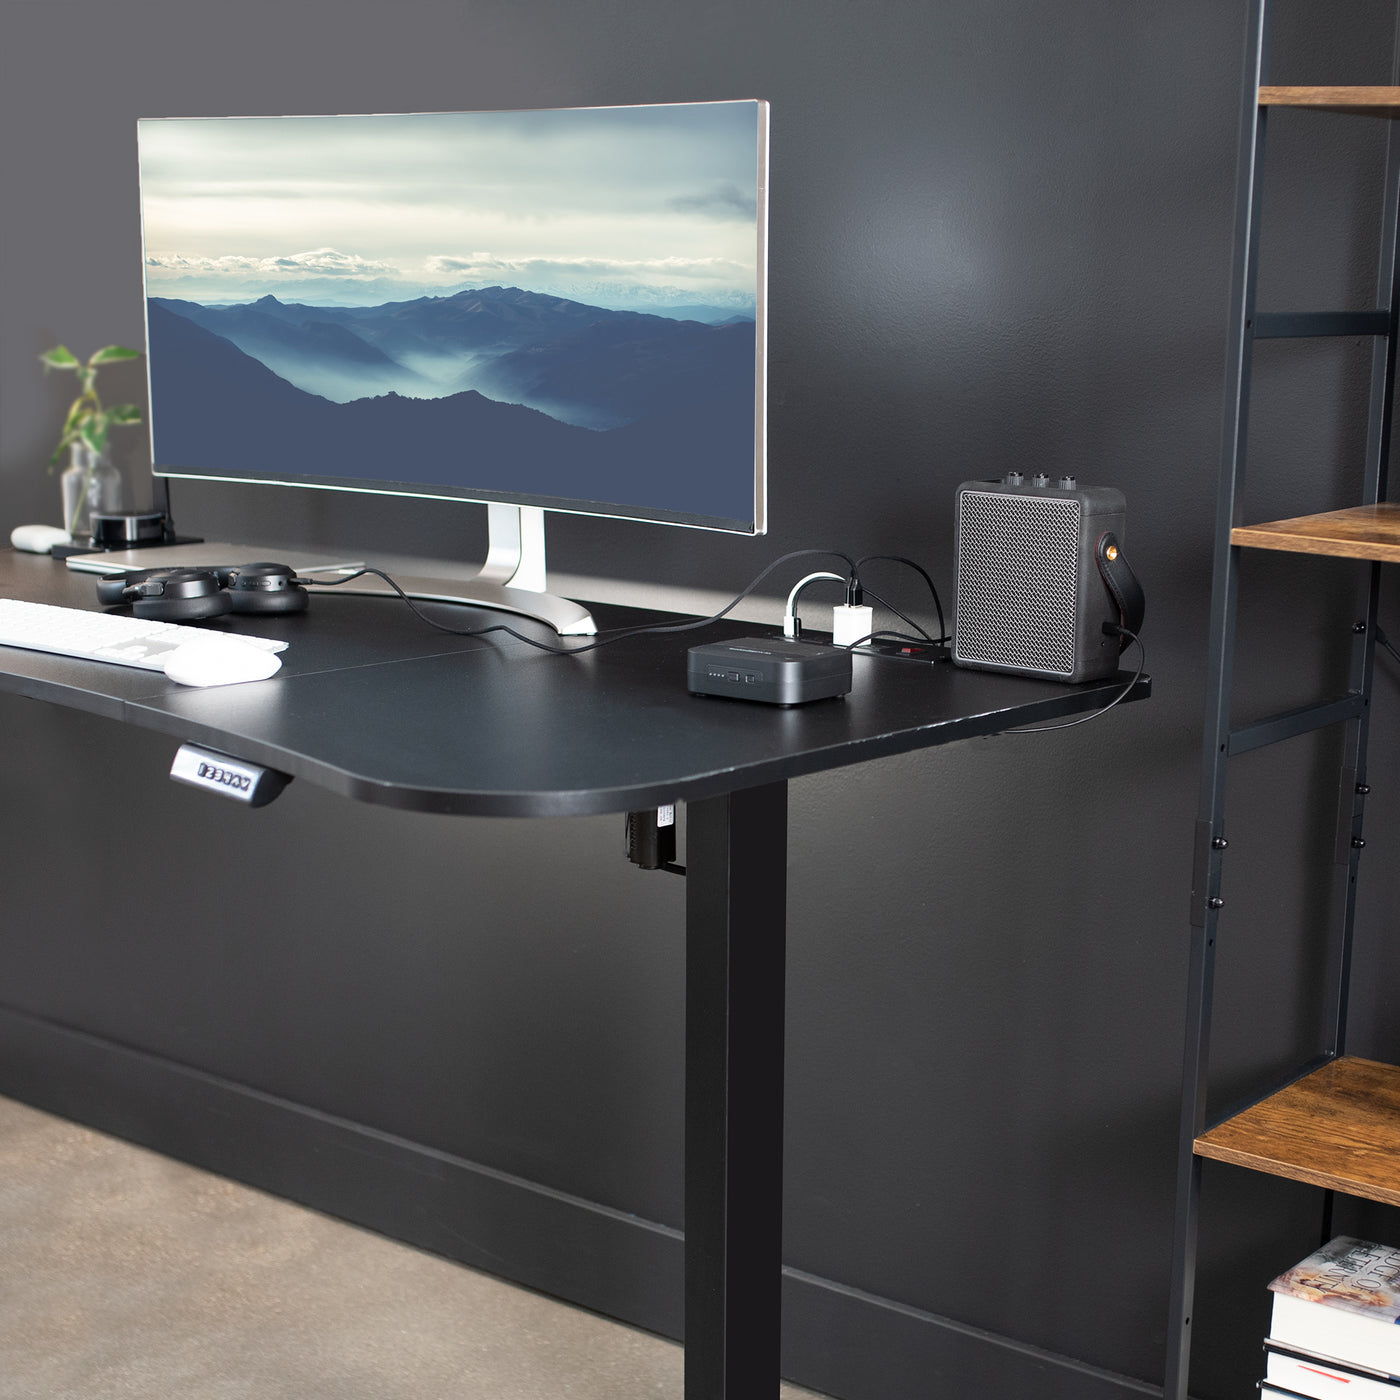  63 x 32 inch Universal Table Top with Built-In Power Strip for Standard and Sit Stand Height Adjustable Home and Office Desk Frames